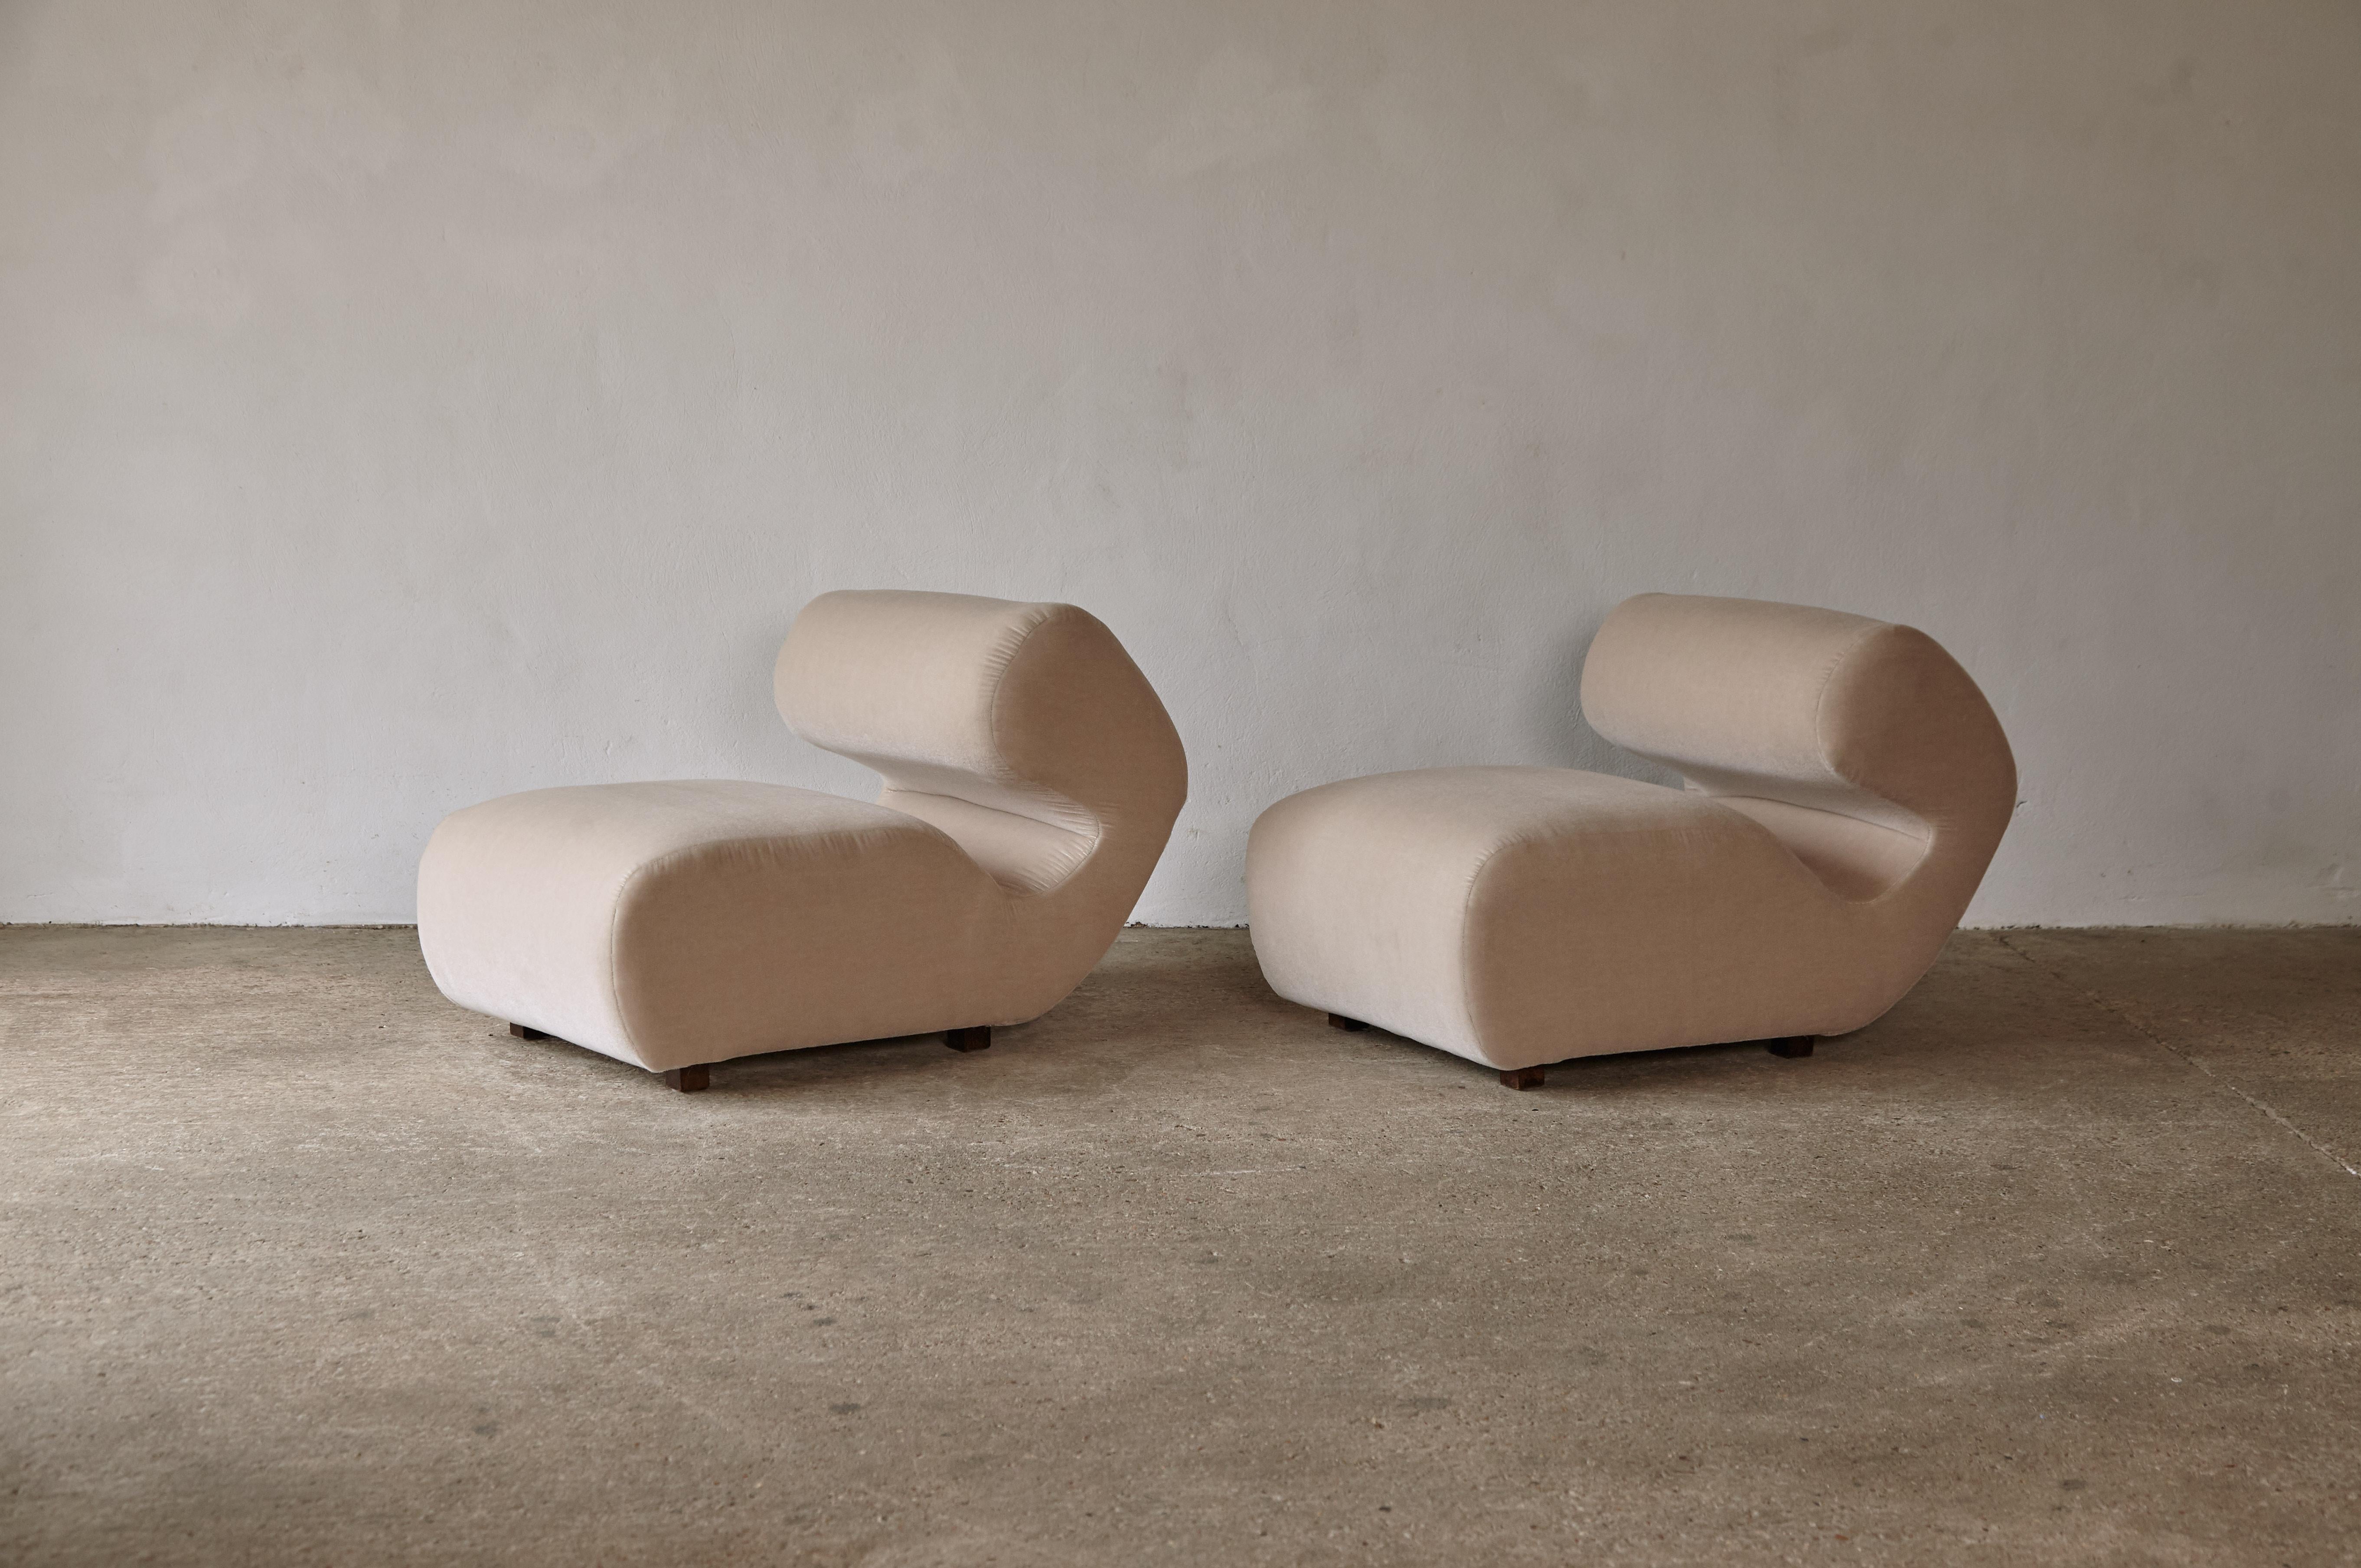 Space Age Rare Sculptural Chairs in Mohair, Italy, 1970s / 80s For Sale